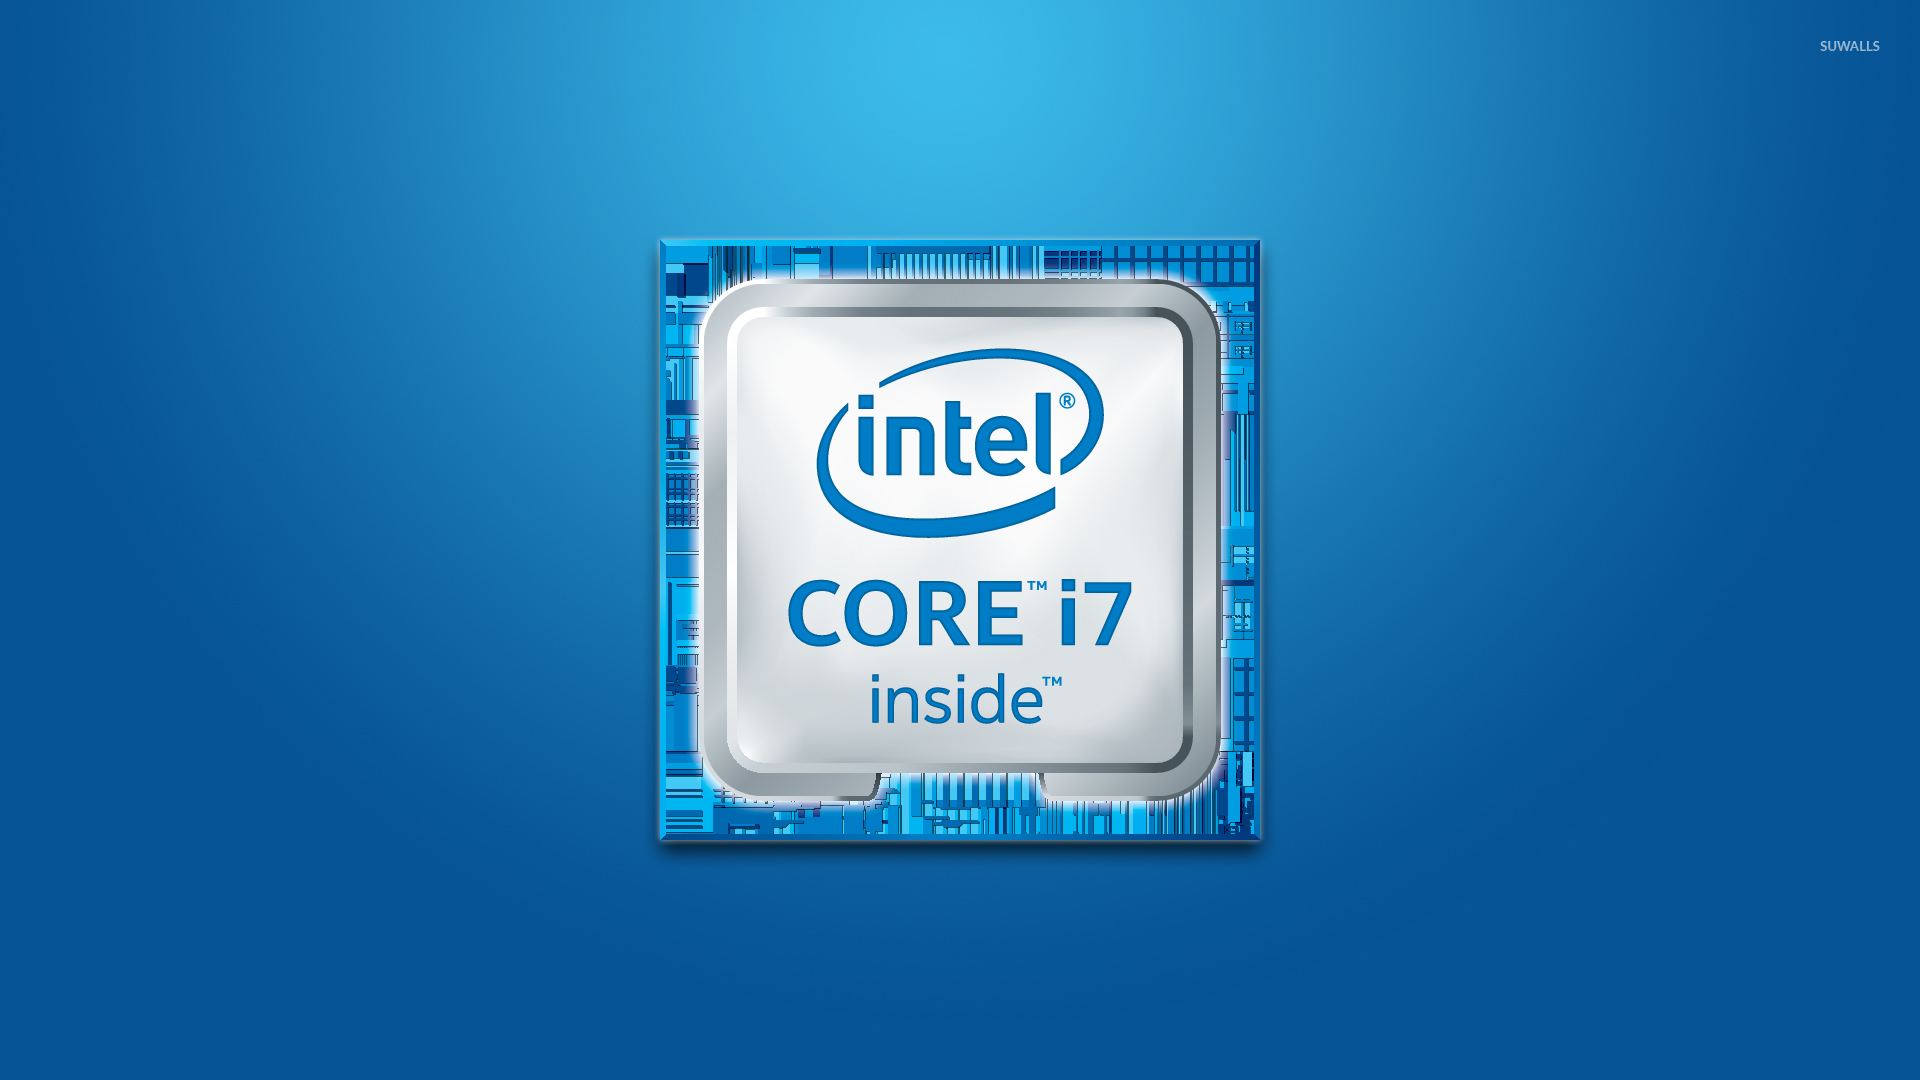 Free Download Intel Core I7 Wallpaper Computer Wallpapers 1680x1050 For Your Desktop Mobile Tablet Explore 49 Intel Core I7 Wallpaper Intel I3 Wallpaper Intel I7 Wallpaper Hd Intel Logo Wallpaper